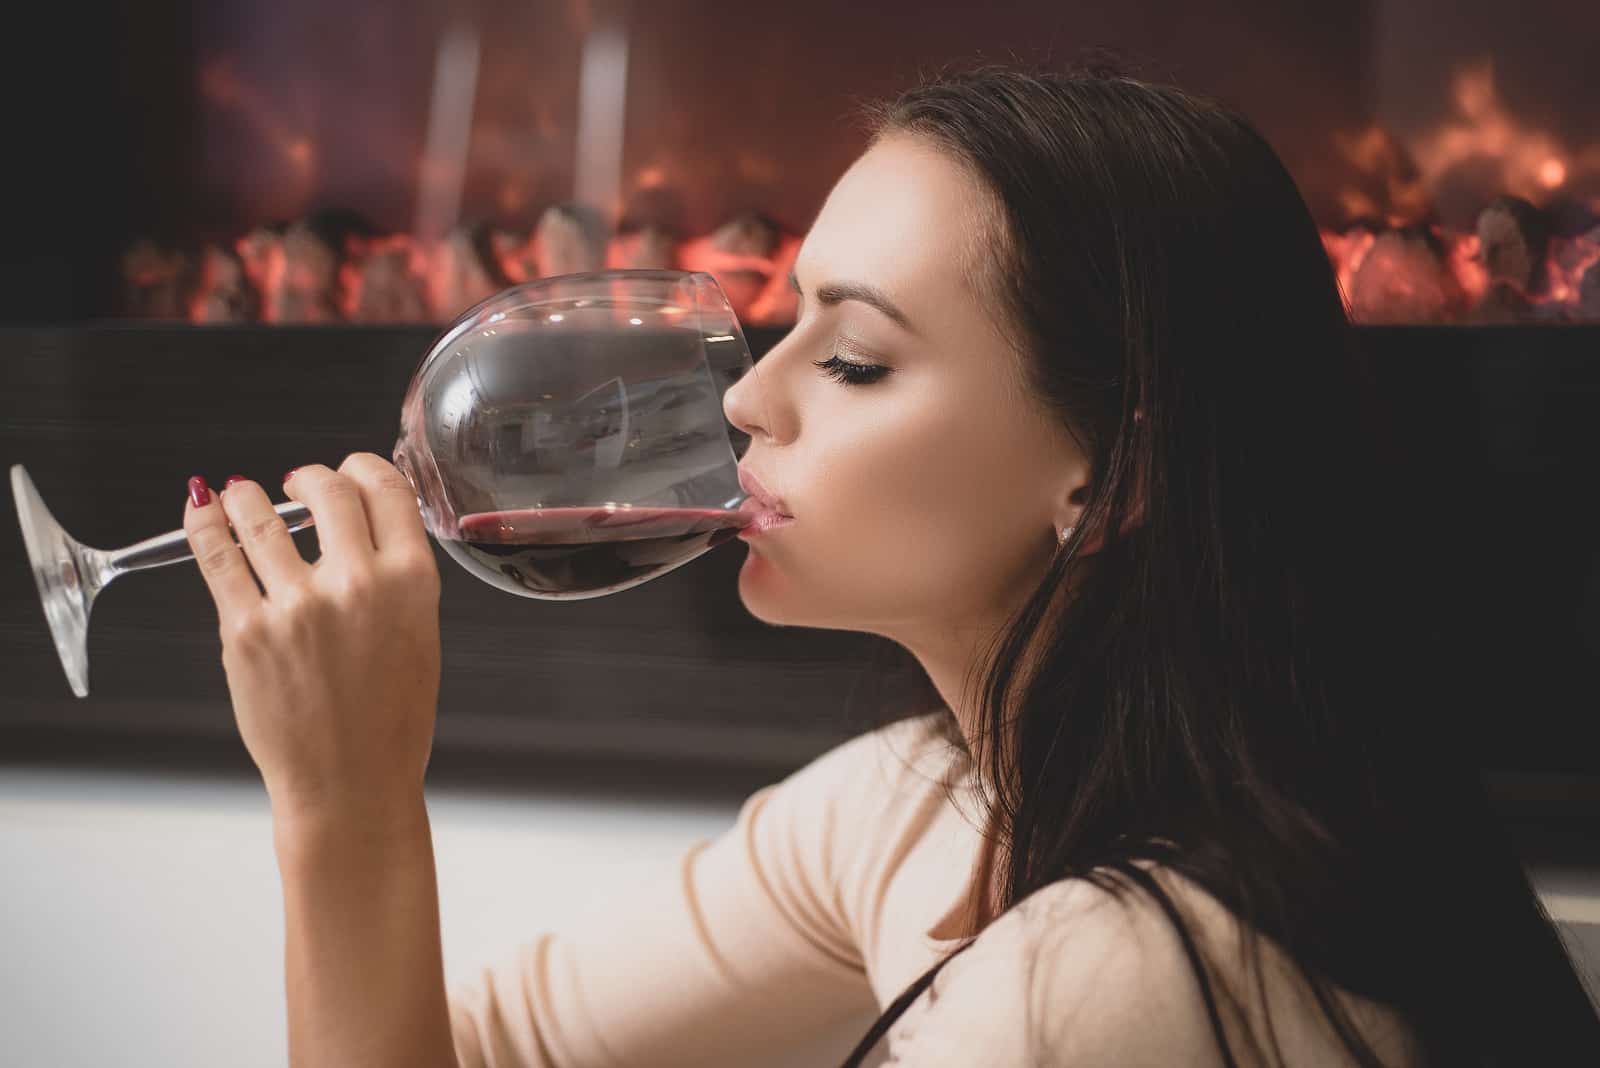 What Happens if You Drink Wine after Working Out?